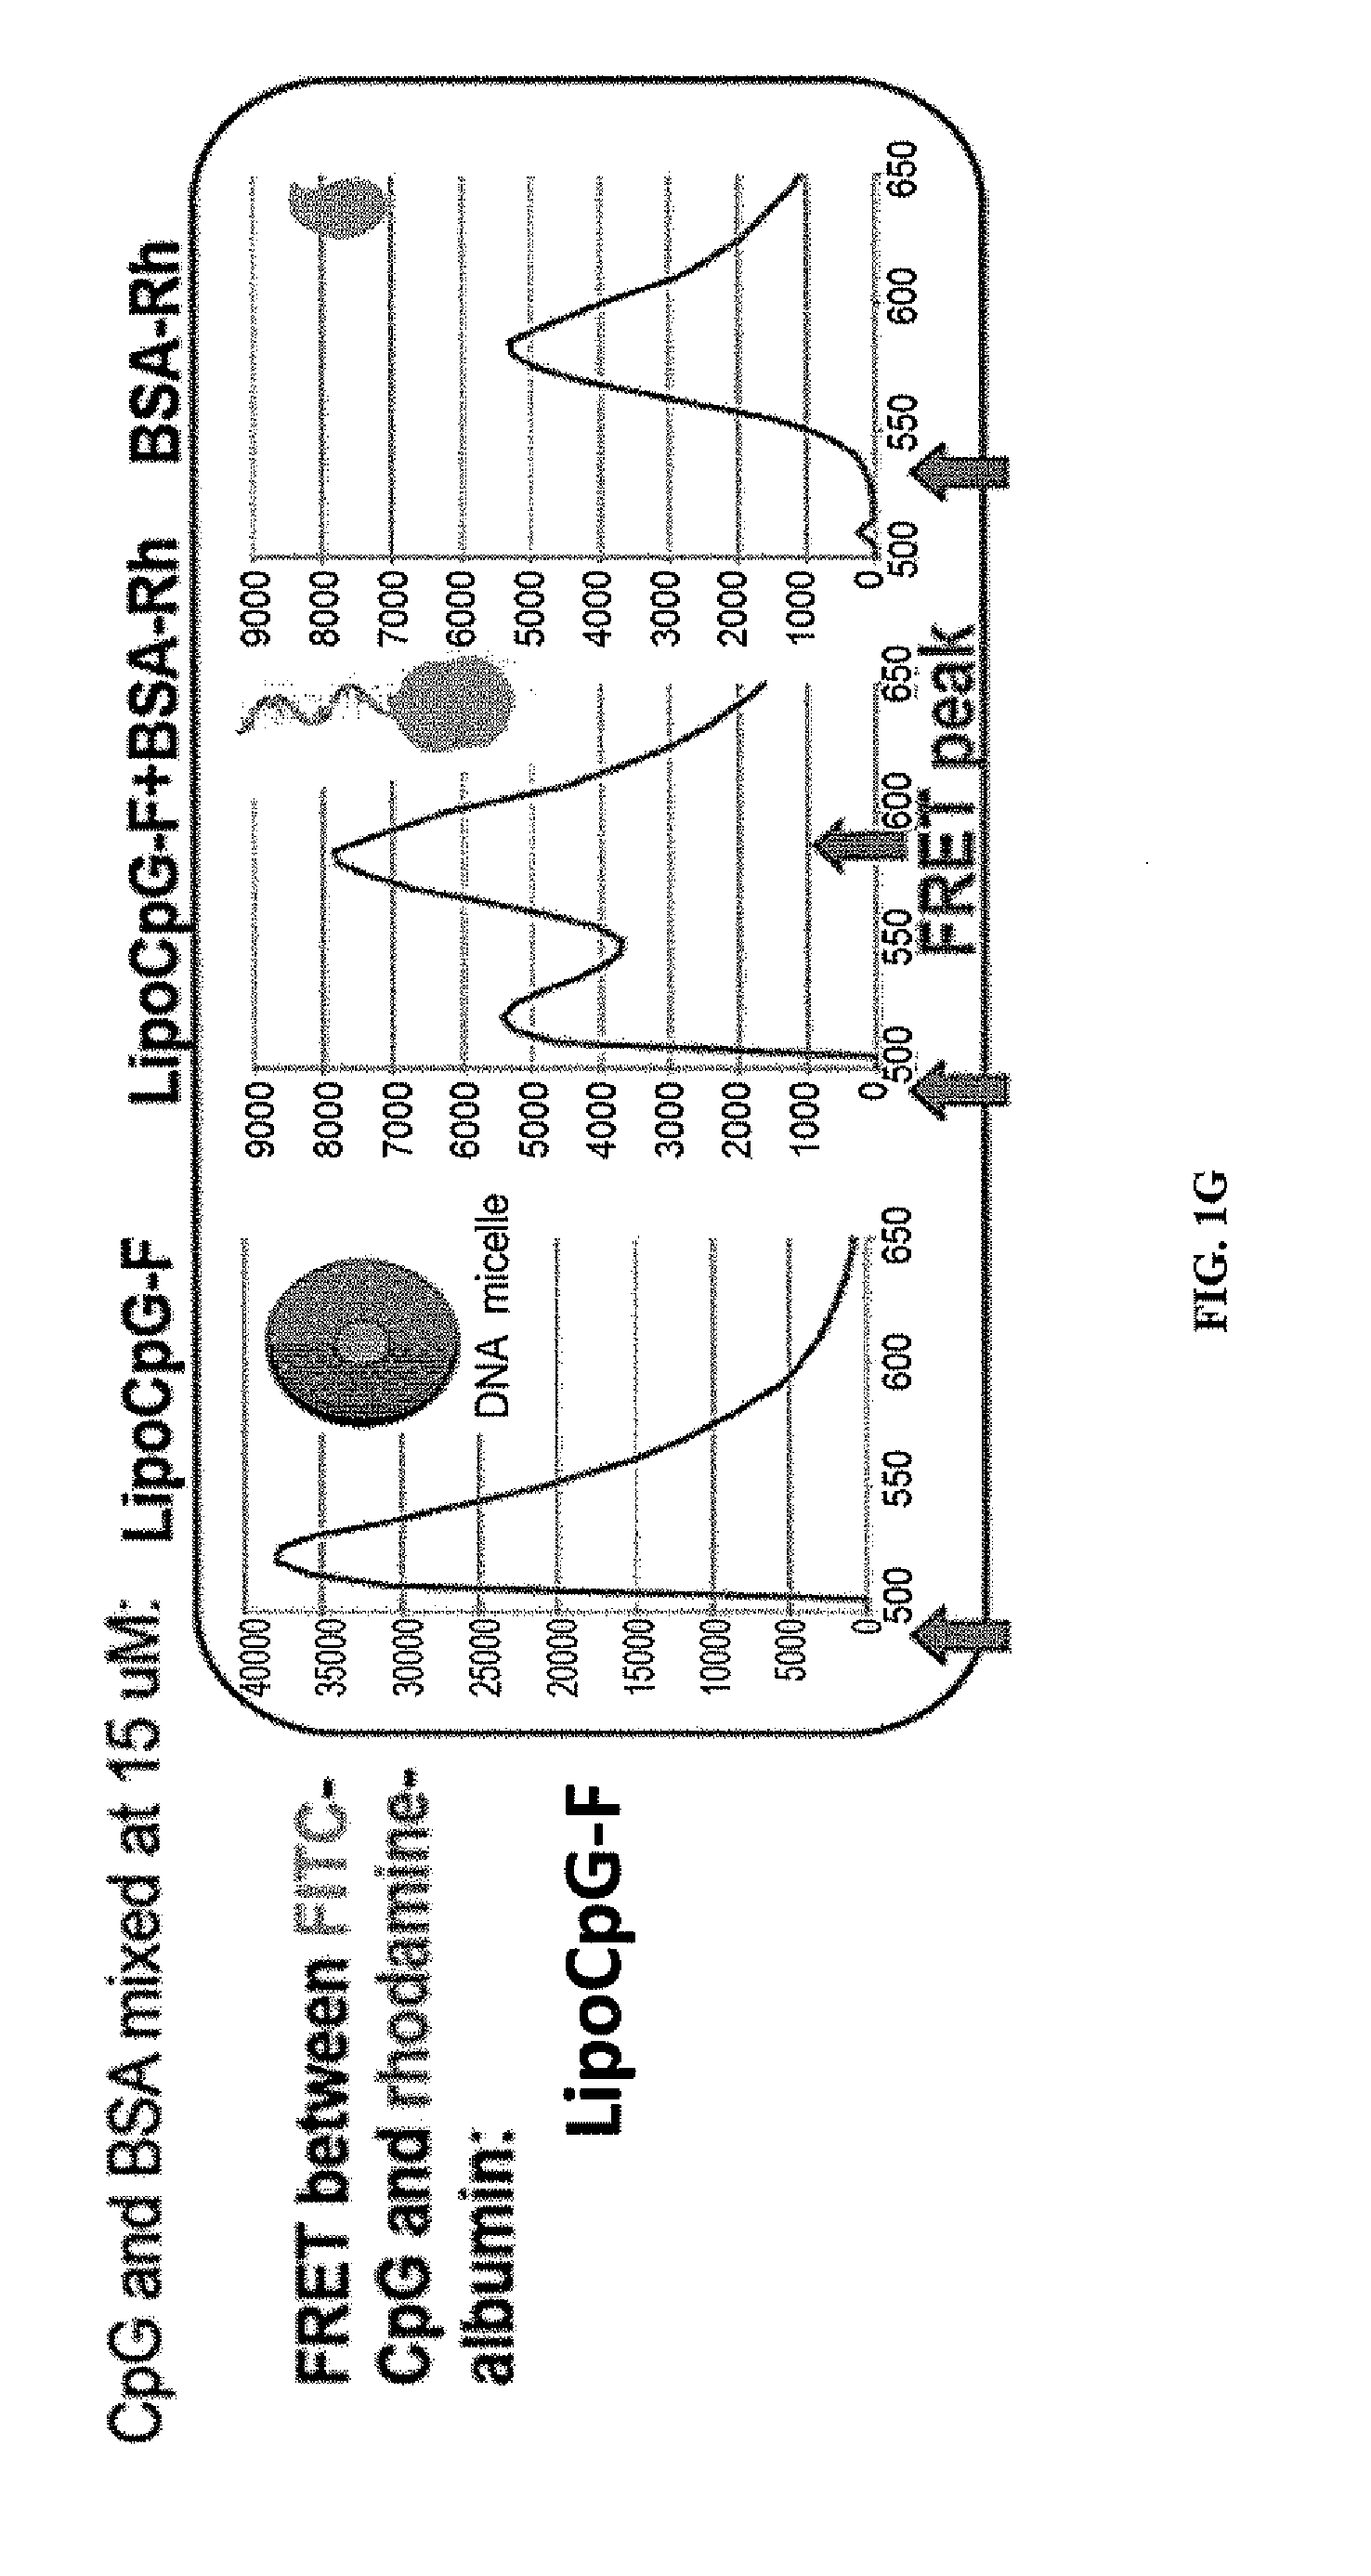 Immunostimulatory compositions and methods of use thereof